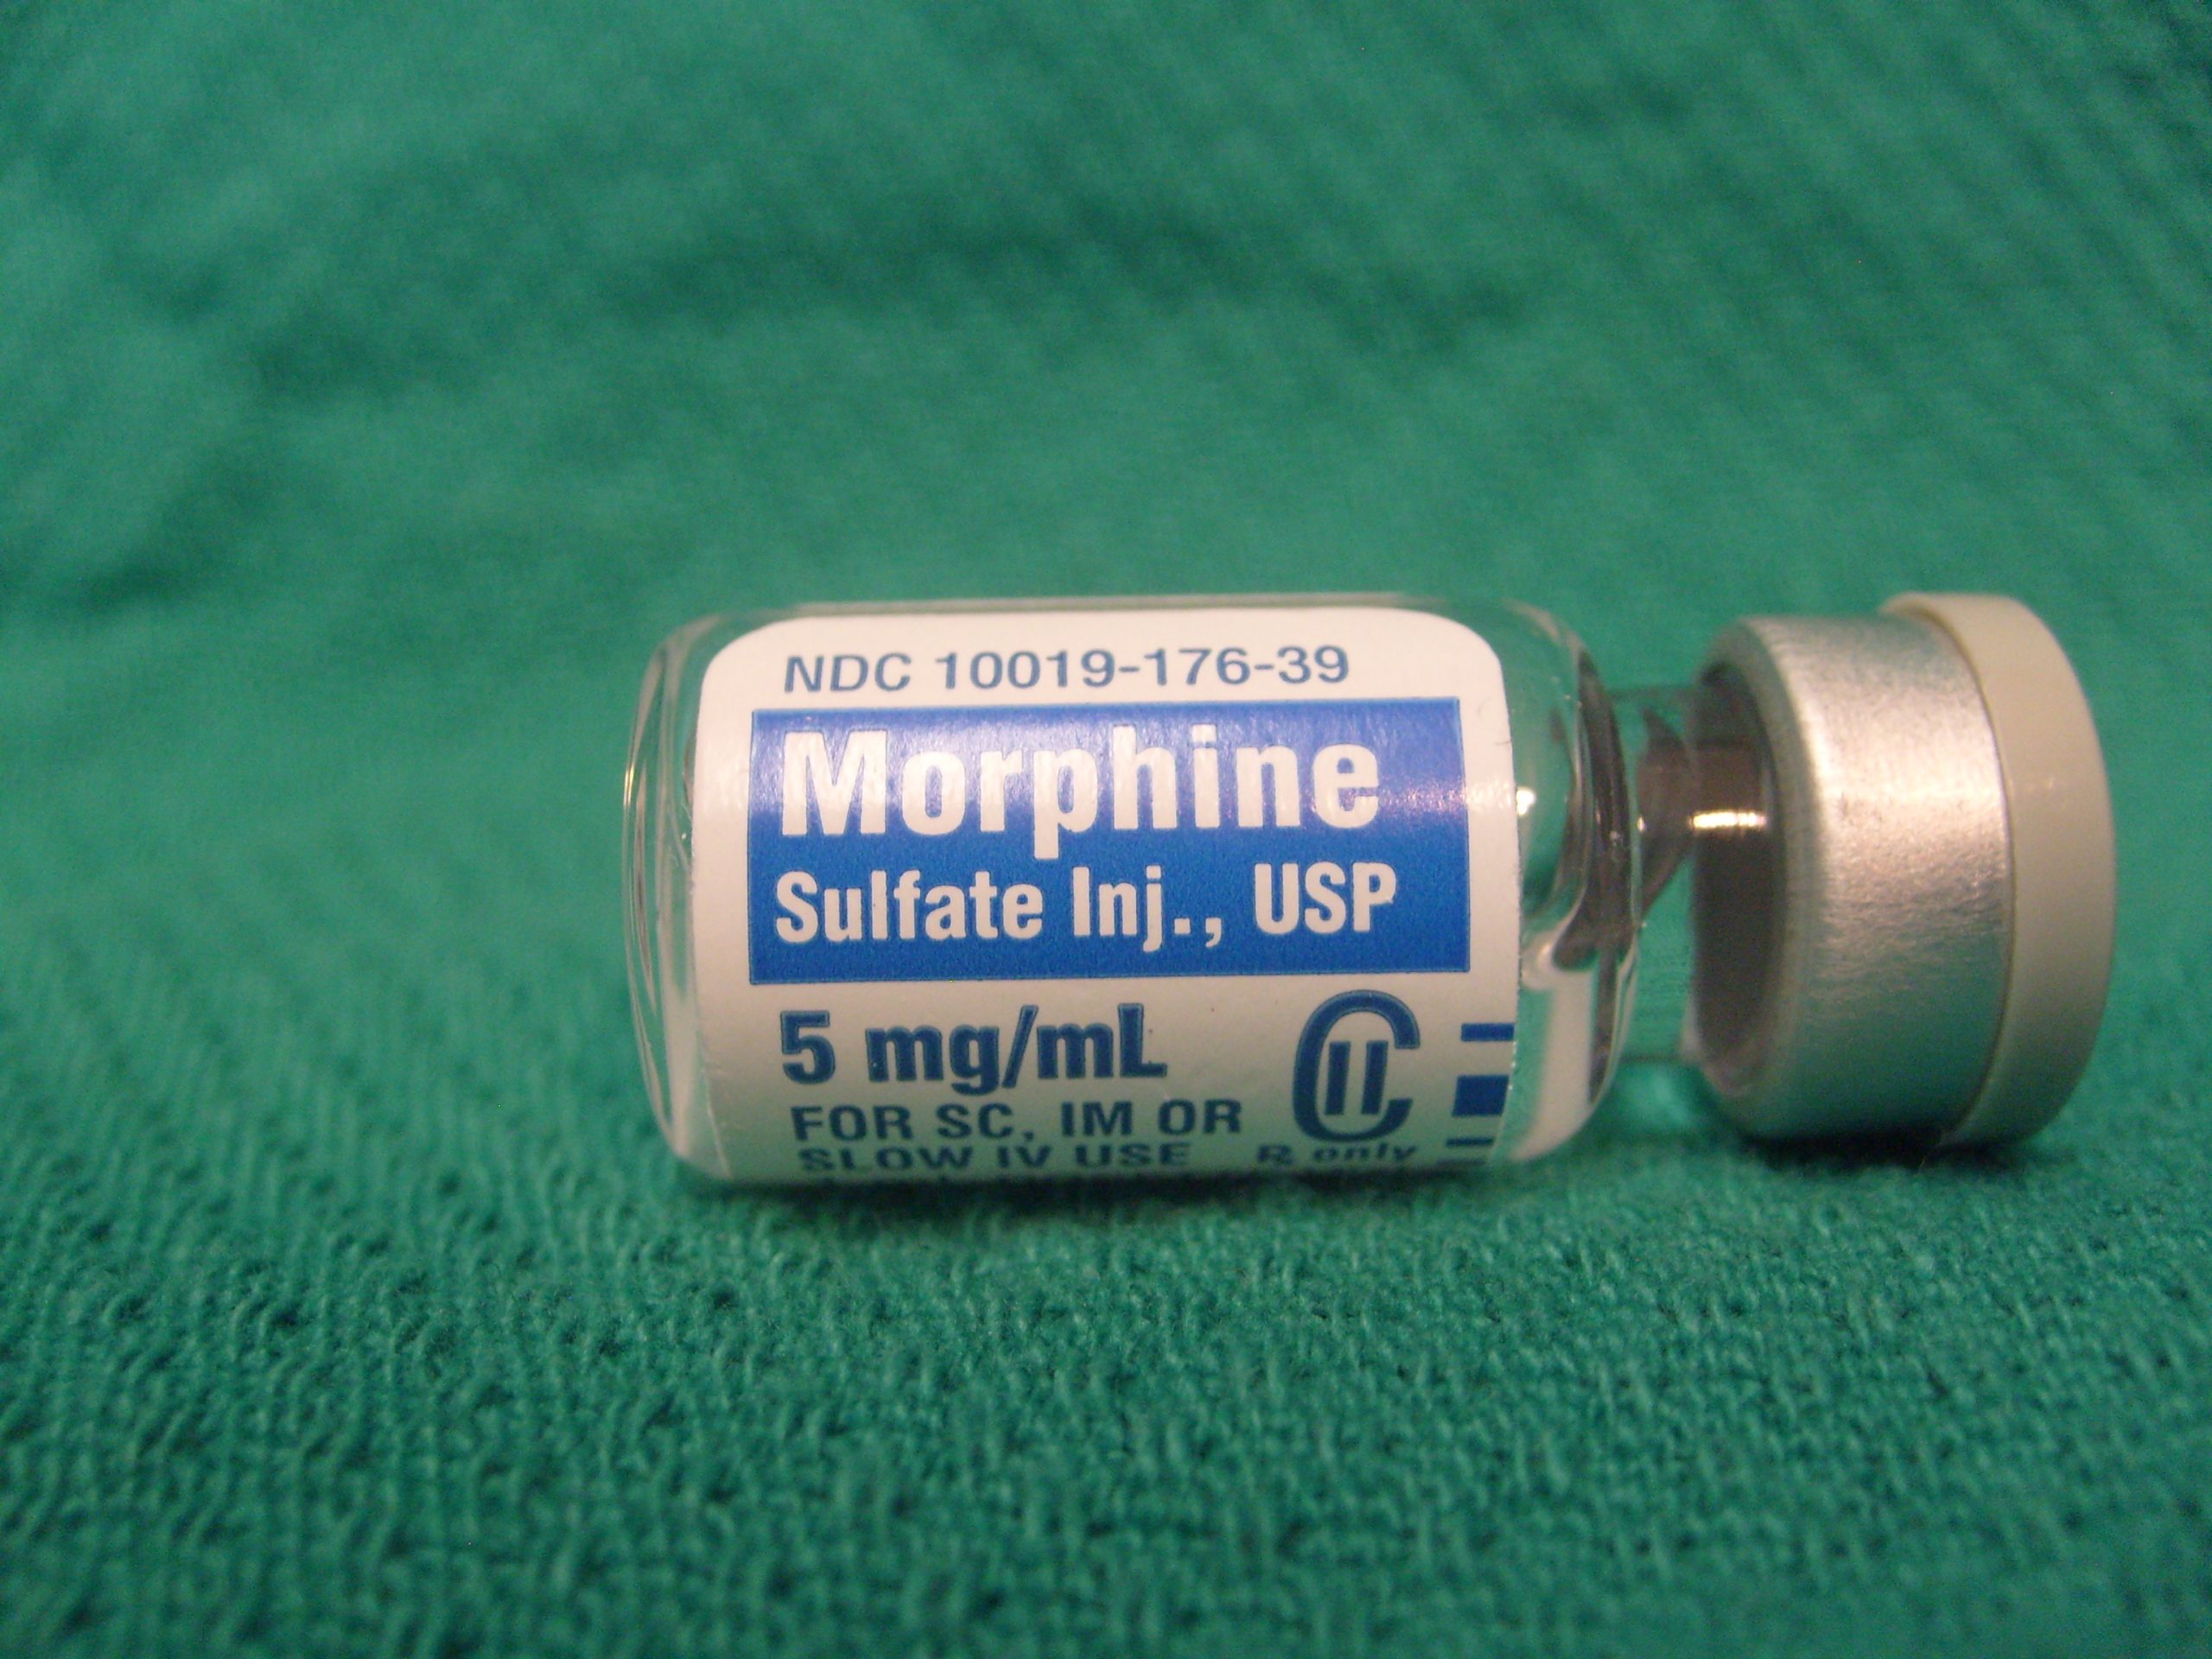 Image of a vial of morphine sulfate